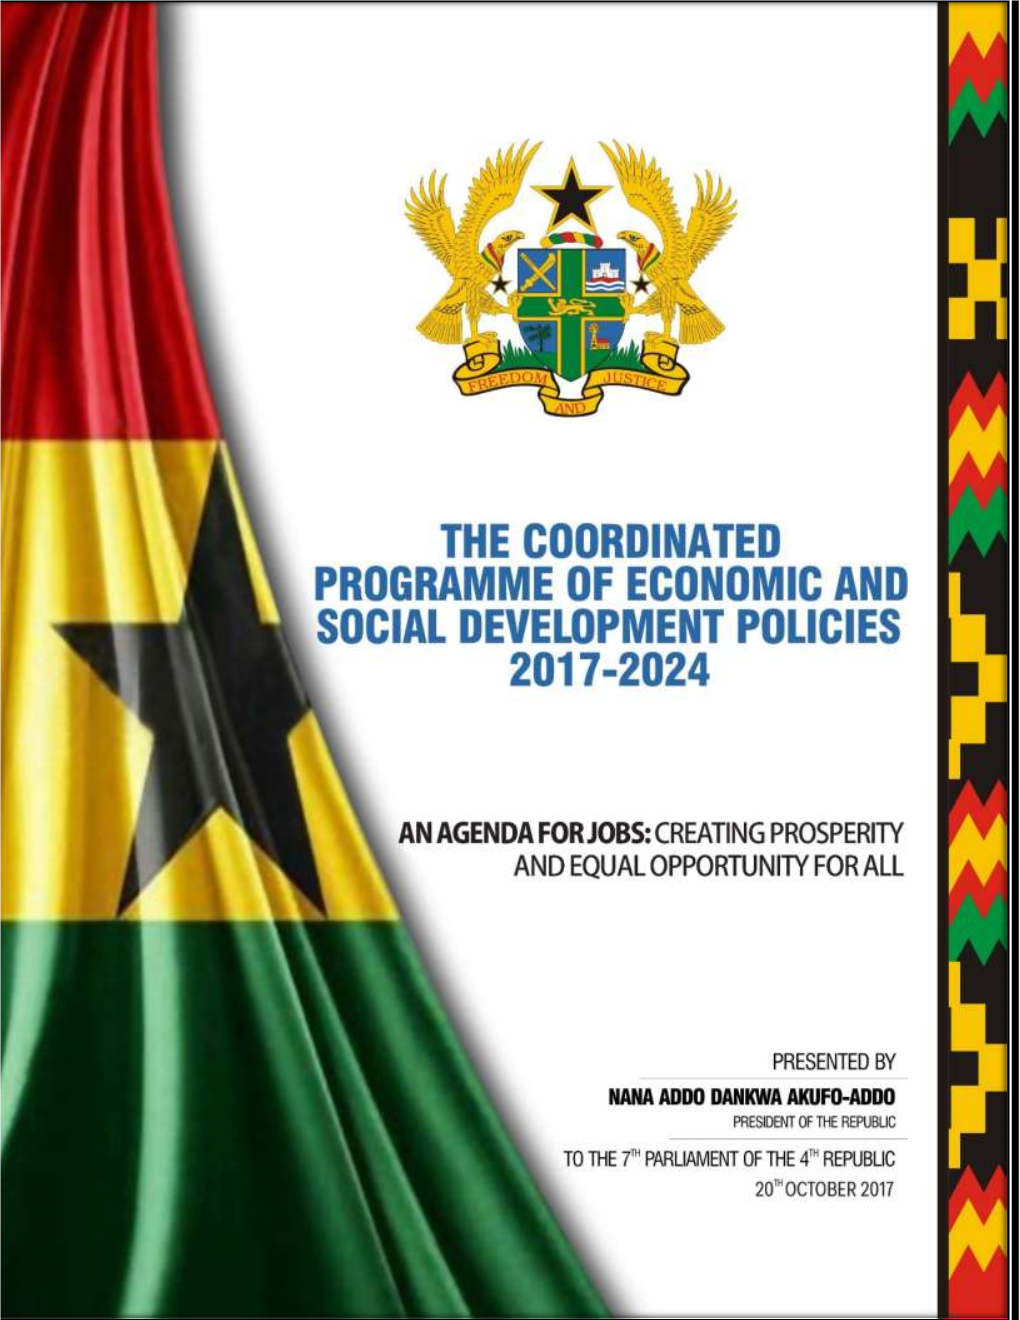 Coordinated Programme of Economic and Social Development Policies (2017-2024)